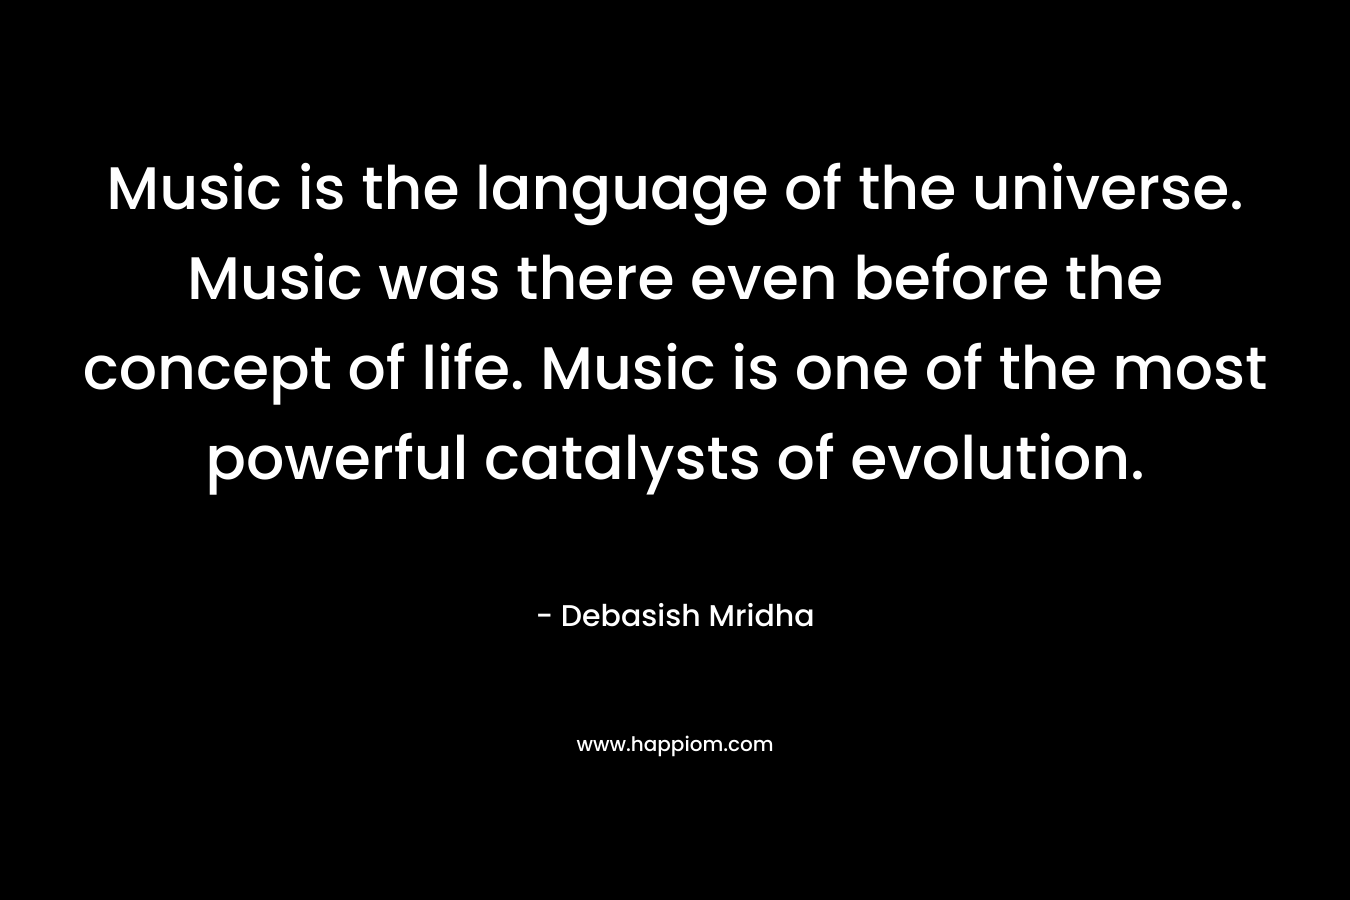 Music is the language of the universe. Music was there even before the concept of life. Music is one of the most powerful catalysts of evolution.